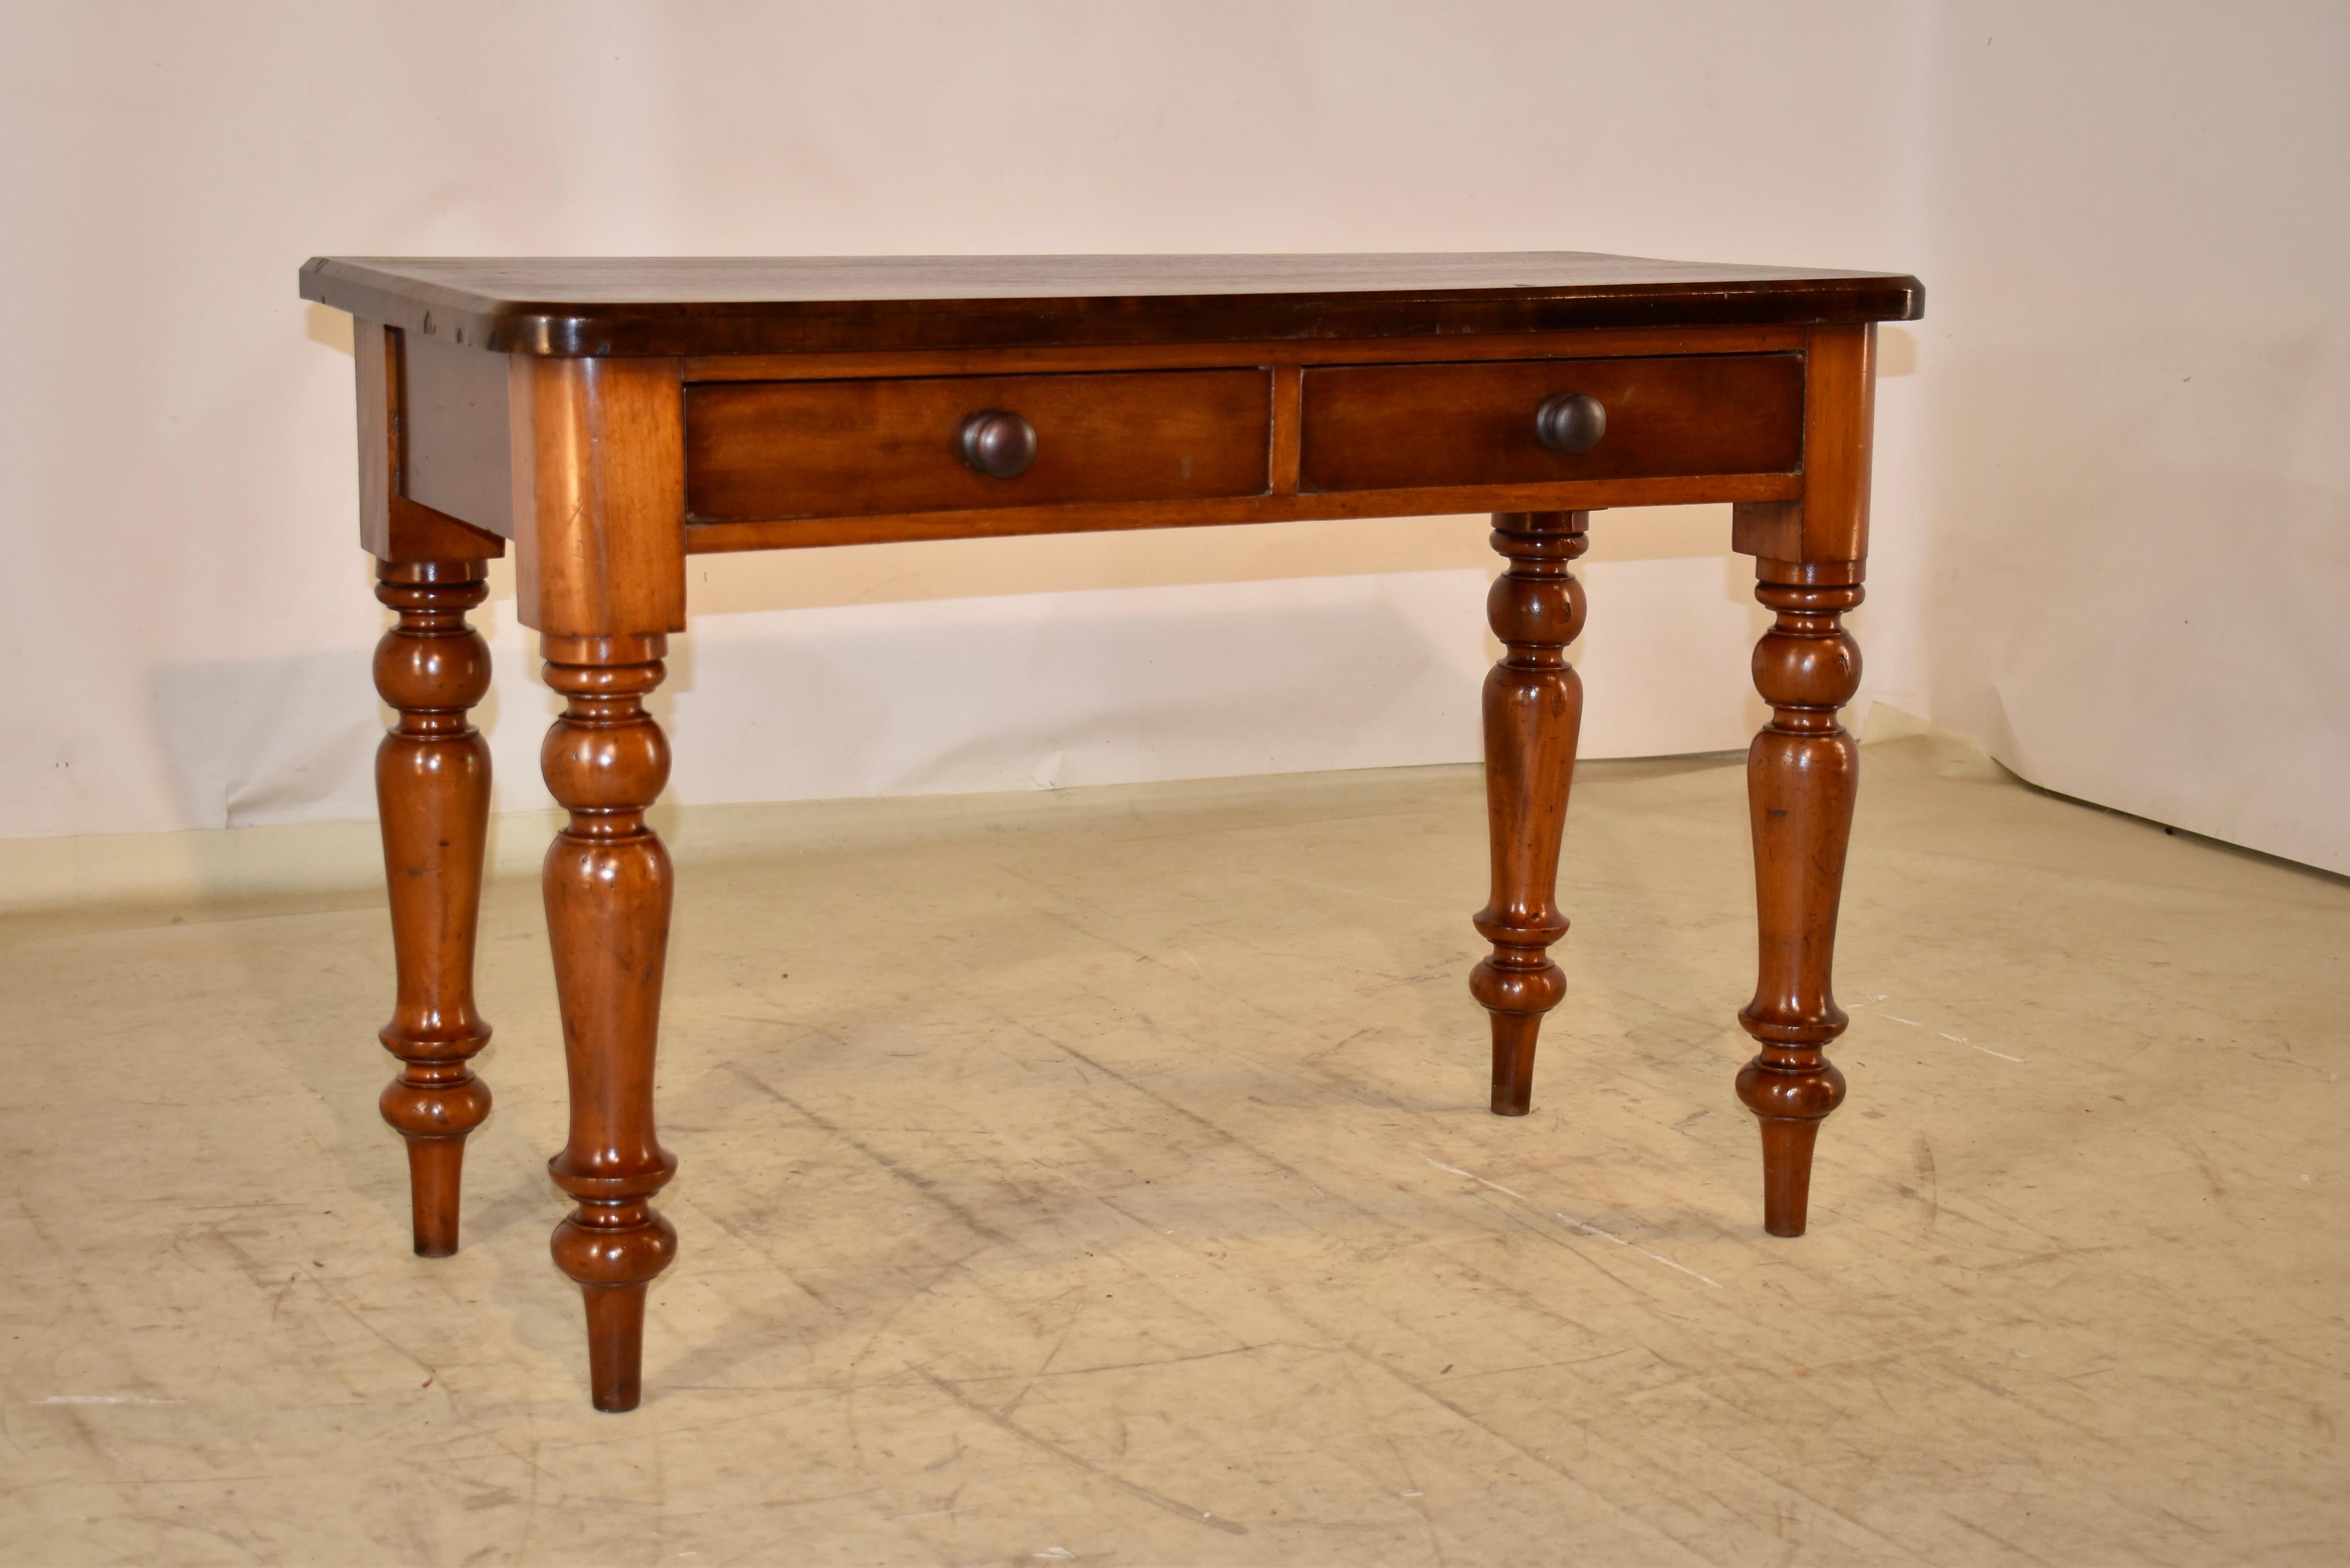 19th Century mahogany console table from England with a beveled edge around the top.  This follows down to a simple apron which contains two drawers in the front and simple sides.  The piece is raised on hand turned legs.  The legs are wonderfully